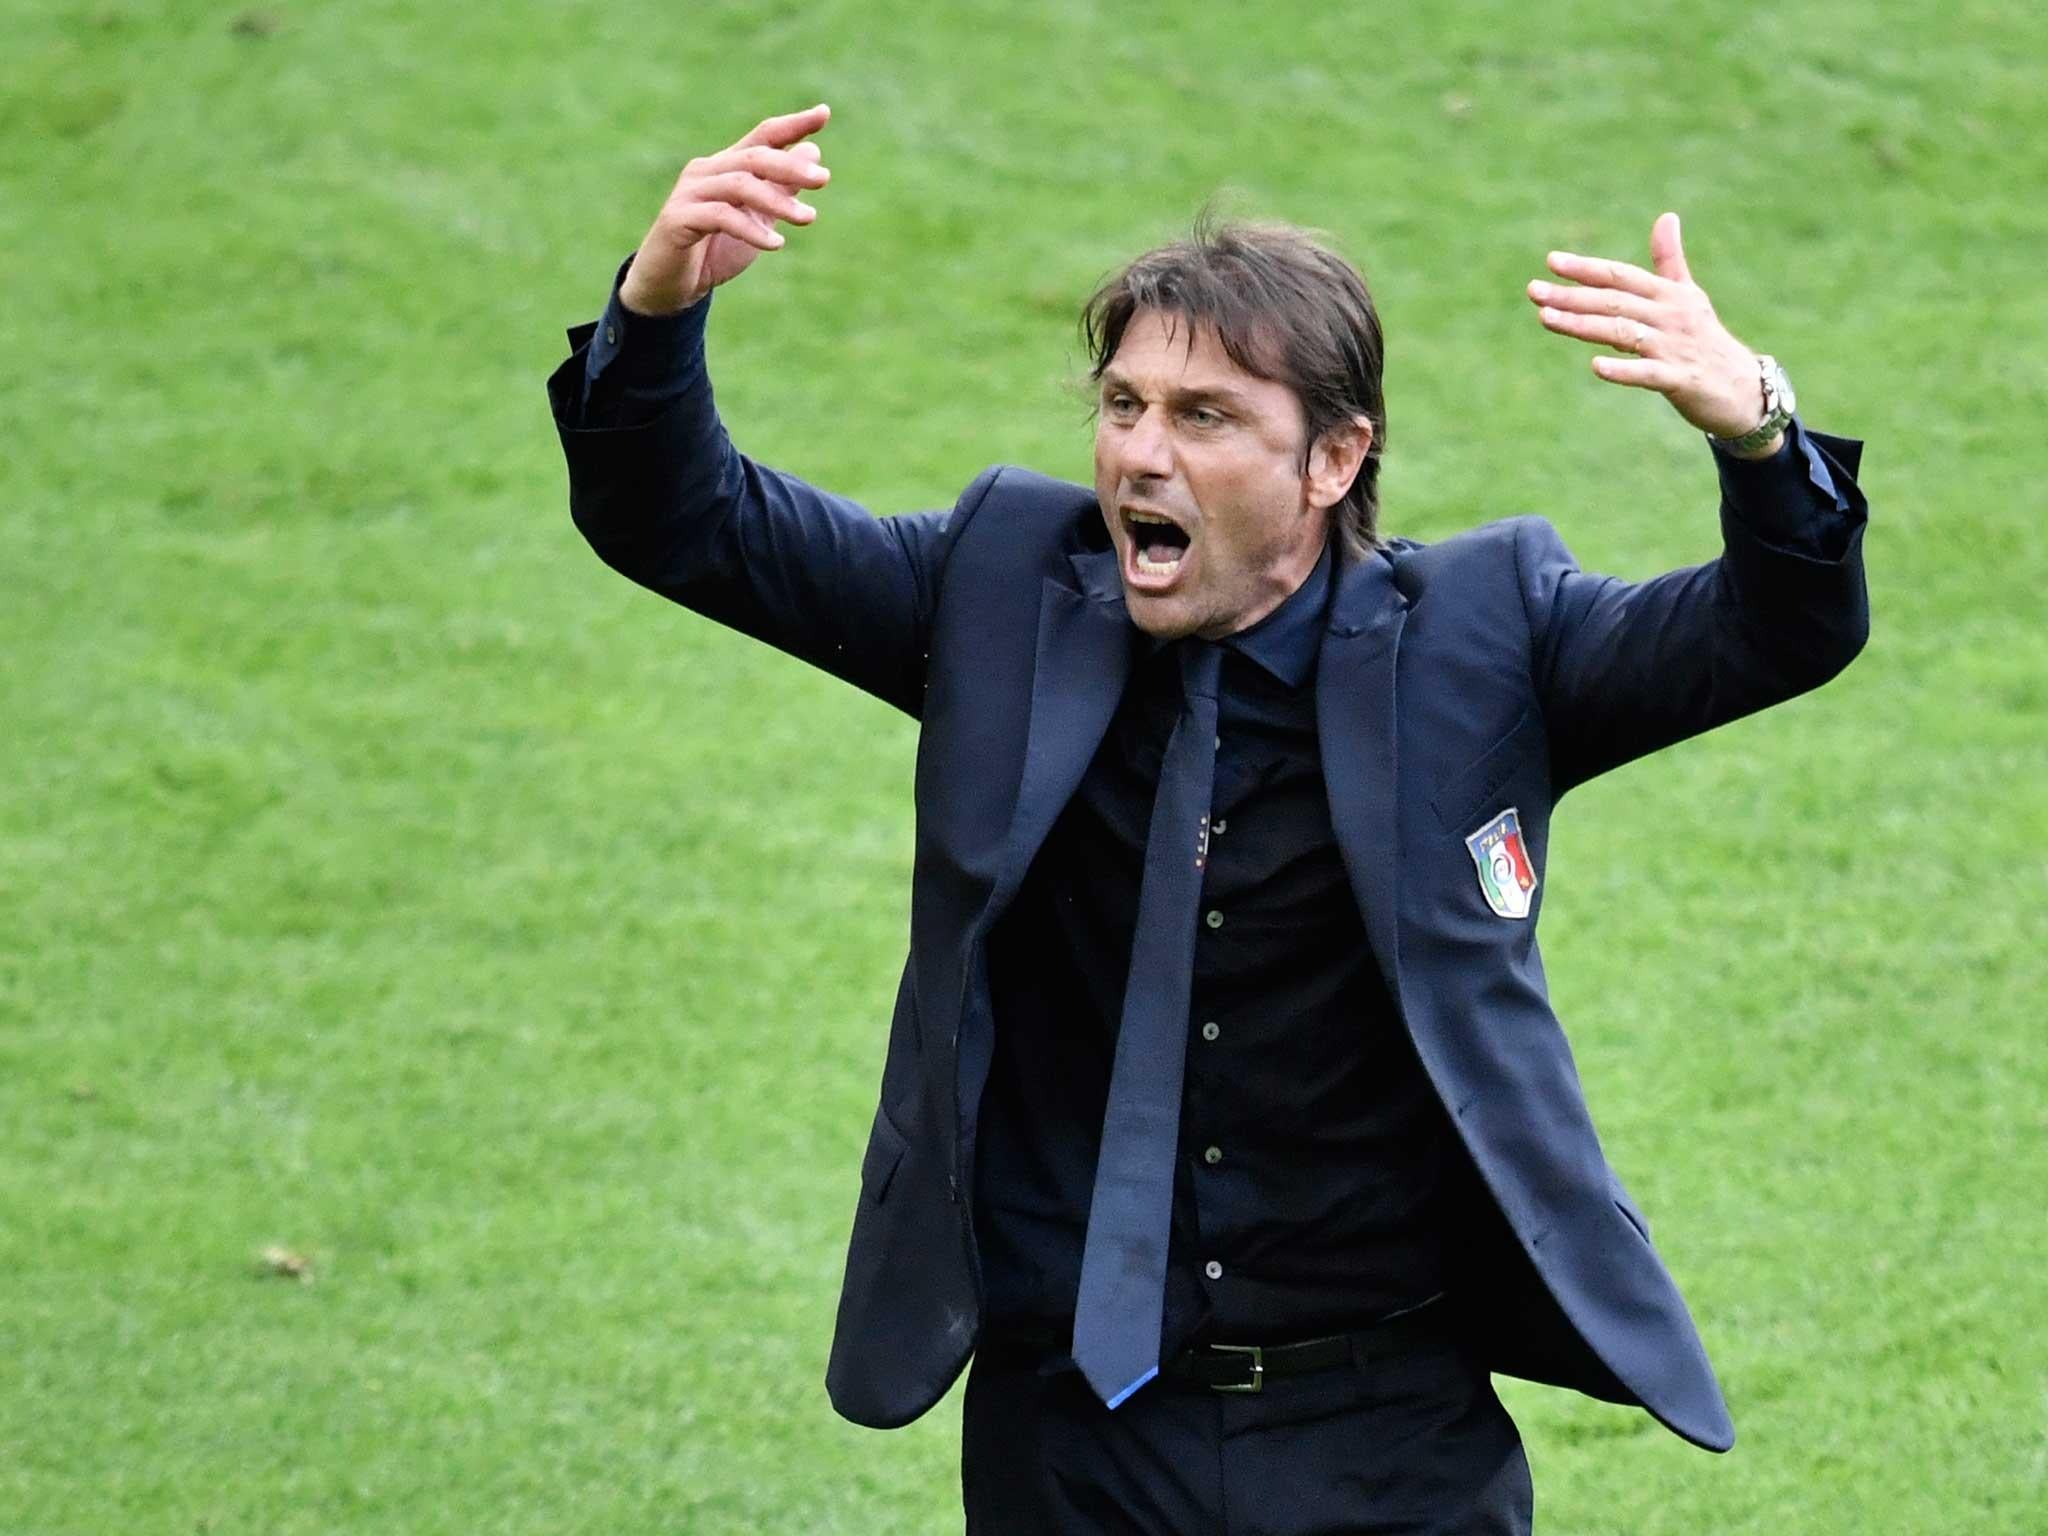 Antonio Conte is widely regarded as the best coach at Euro 2016